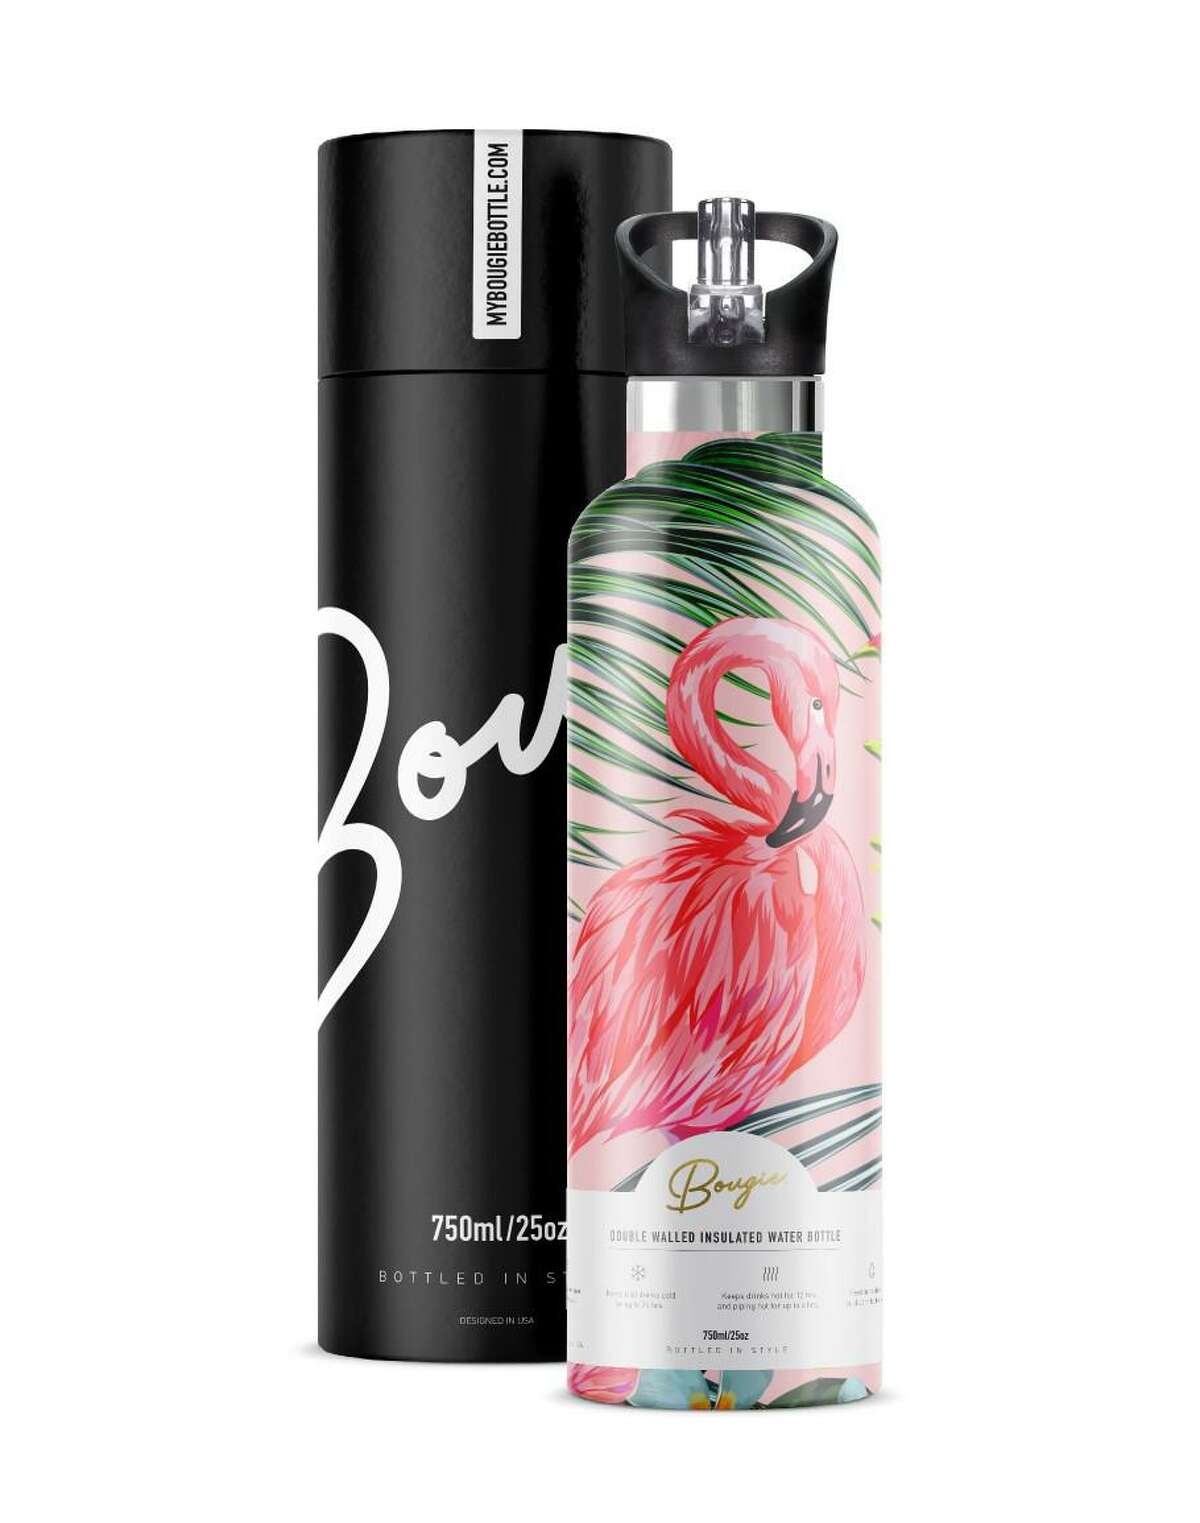 Hawaii-born Juliet Pearson is on a mission to reduce the use of plastic bottles and make hydration more gorgeous than ever through her stainless-steel water bottle line, My Bougie Bottle.(Provided)